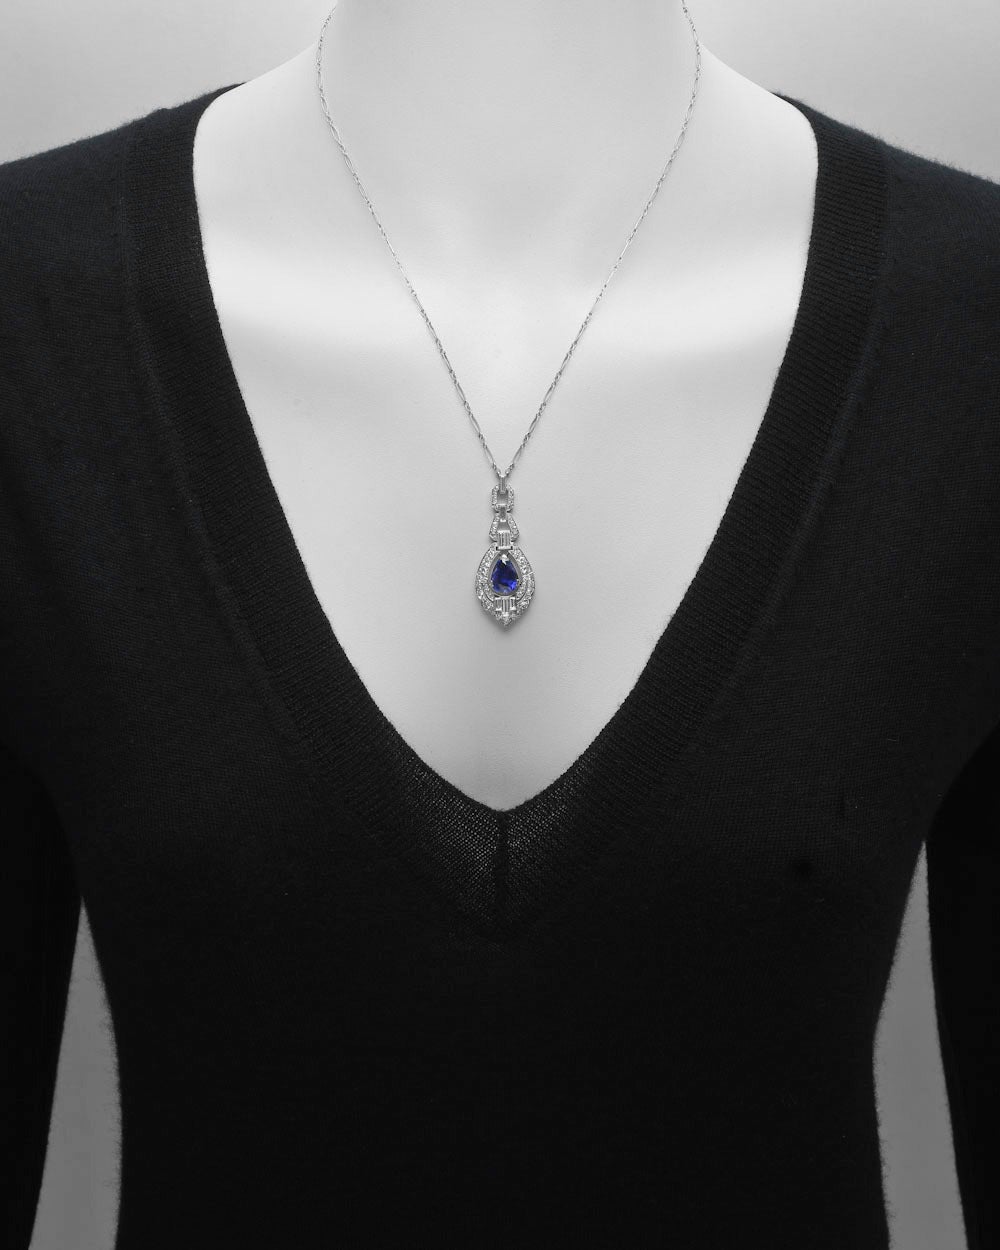 Late Deco sapphire and diamond pendant necklace, the pendant centering on a natural pear-shaped sapphire weighing 3.86 carats, within a geometric frame set with baguette-cut and circular-cut diamonds, the diamonds weighing approximately 1.82 total